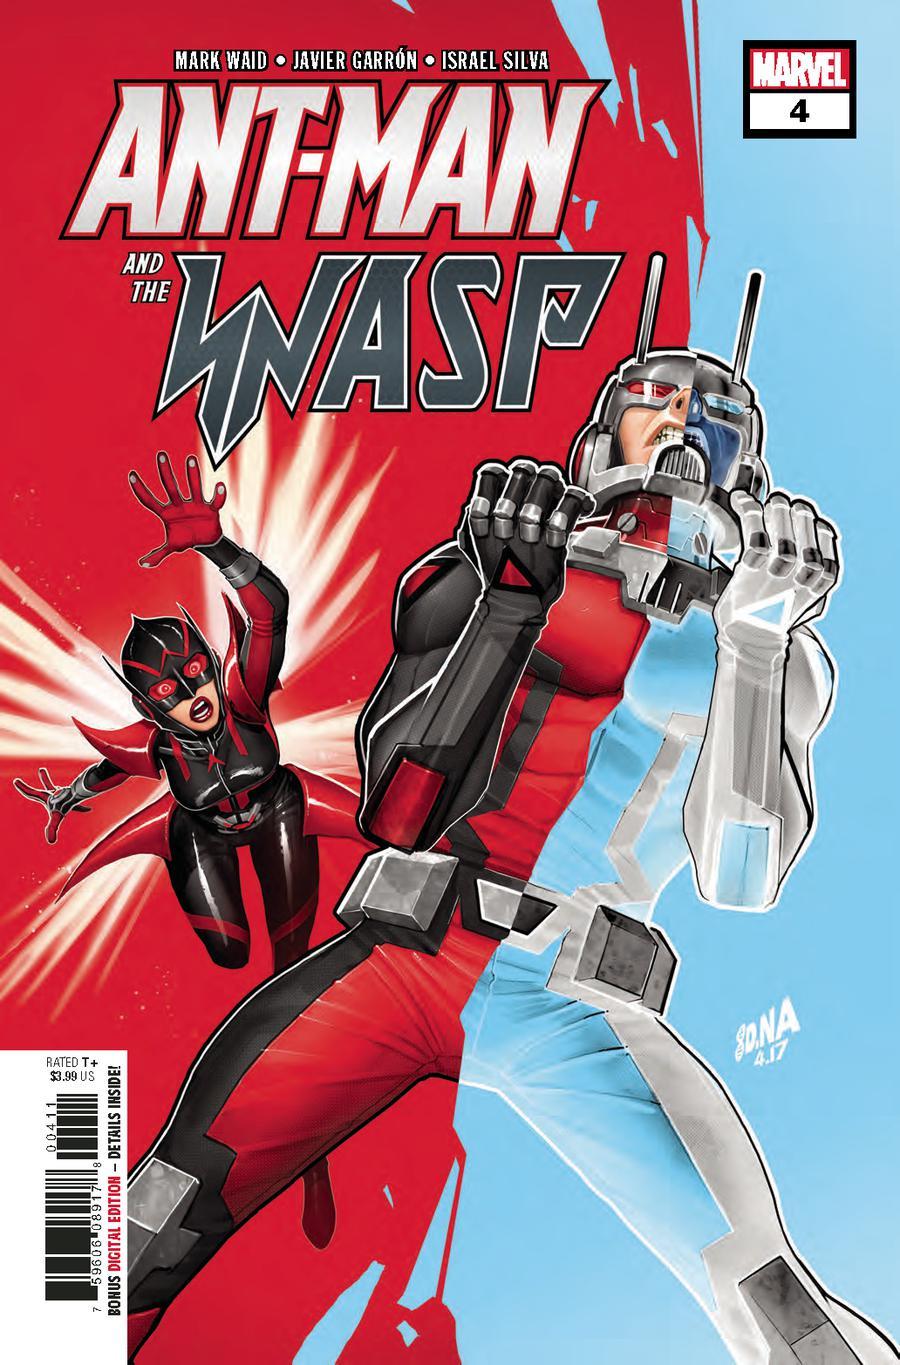 Ant-Man and the Wasp Vol. 1 #4